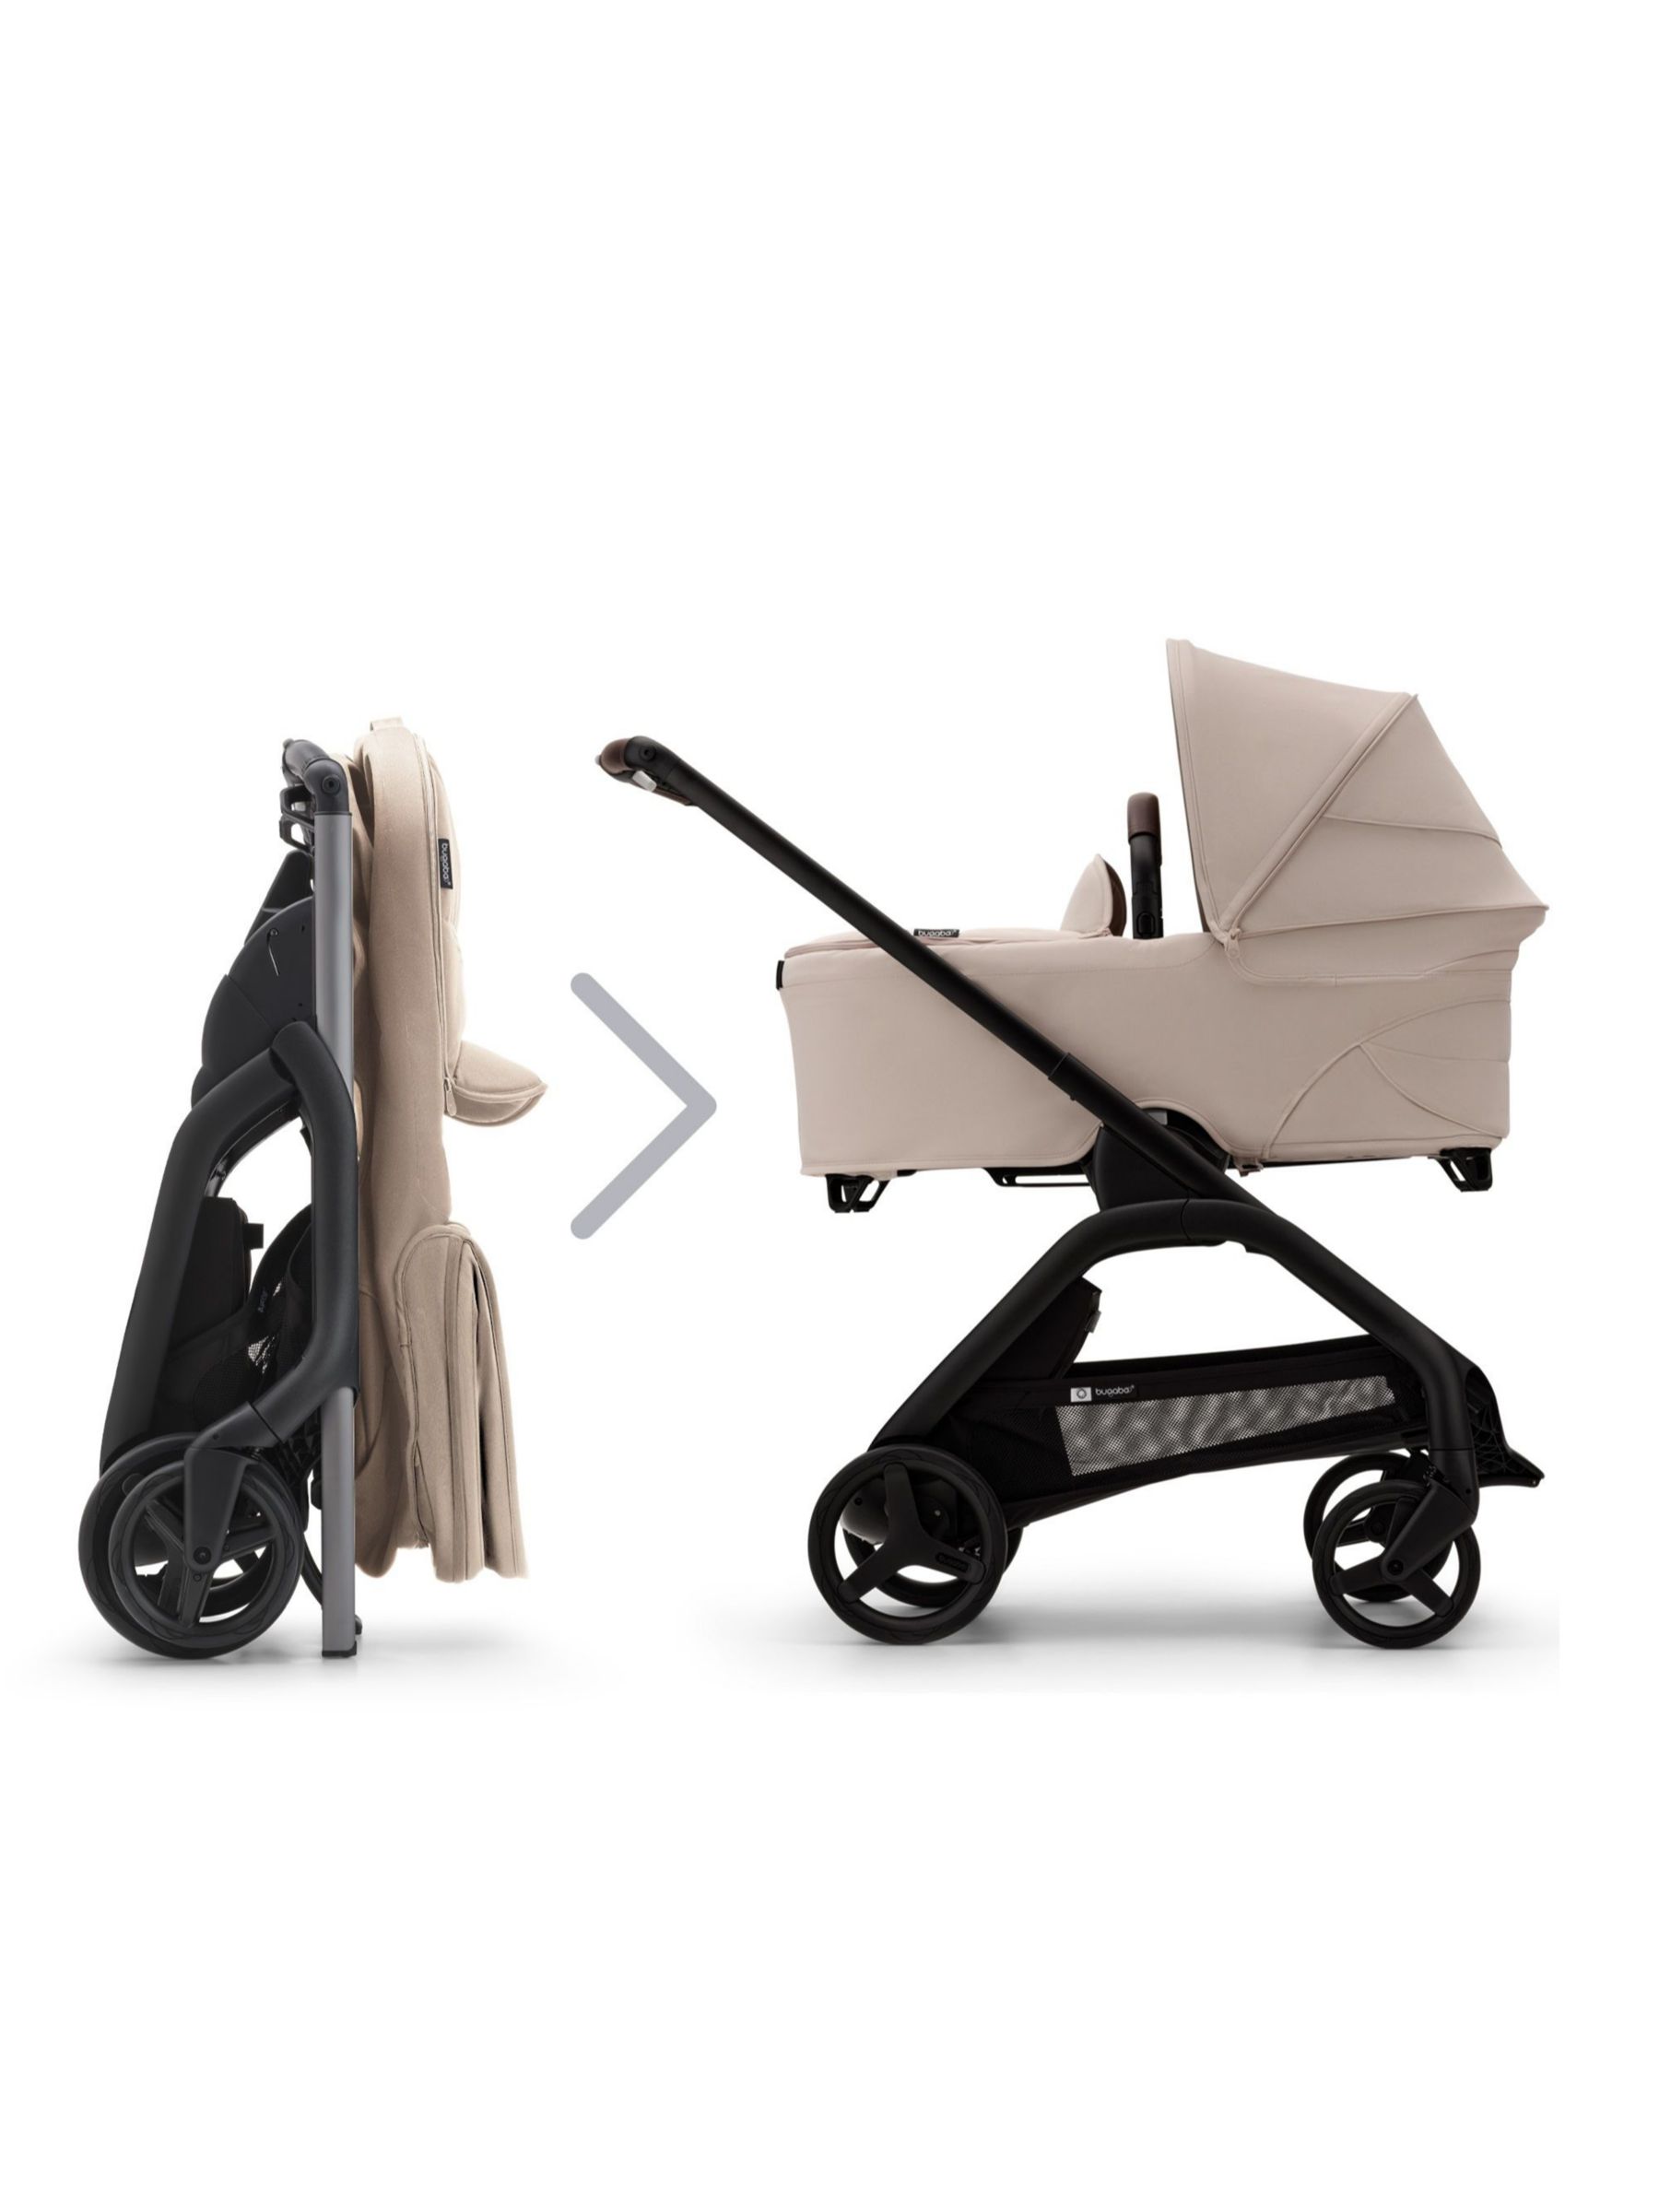 Bugaboo Dragonfly Pushchair & Carrycot, Turtle Air by Nuna Car Seat with Base & Accessories Ultimate Bundle, Desert Taupe/Black